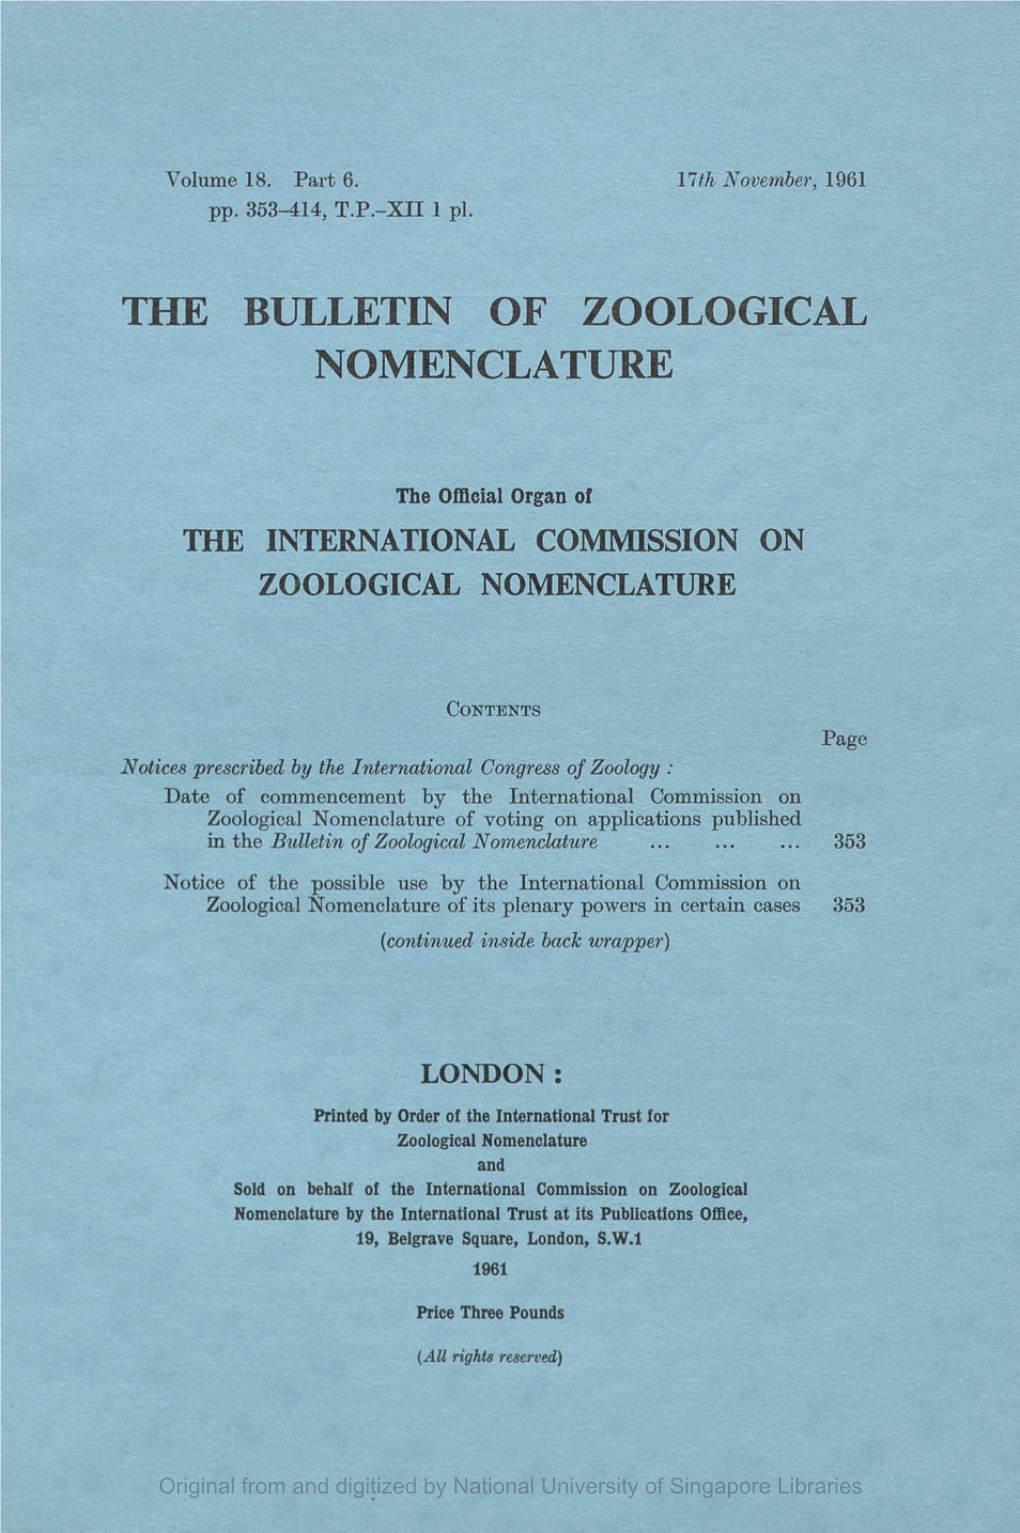 The Bulletin of Zoological Nomenclature, V18 Part06